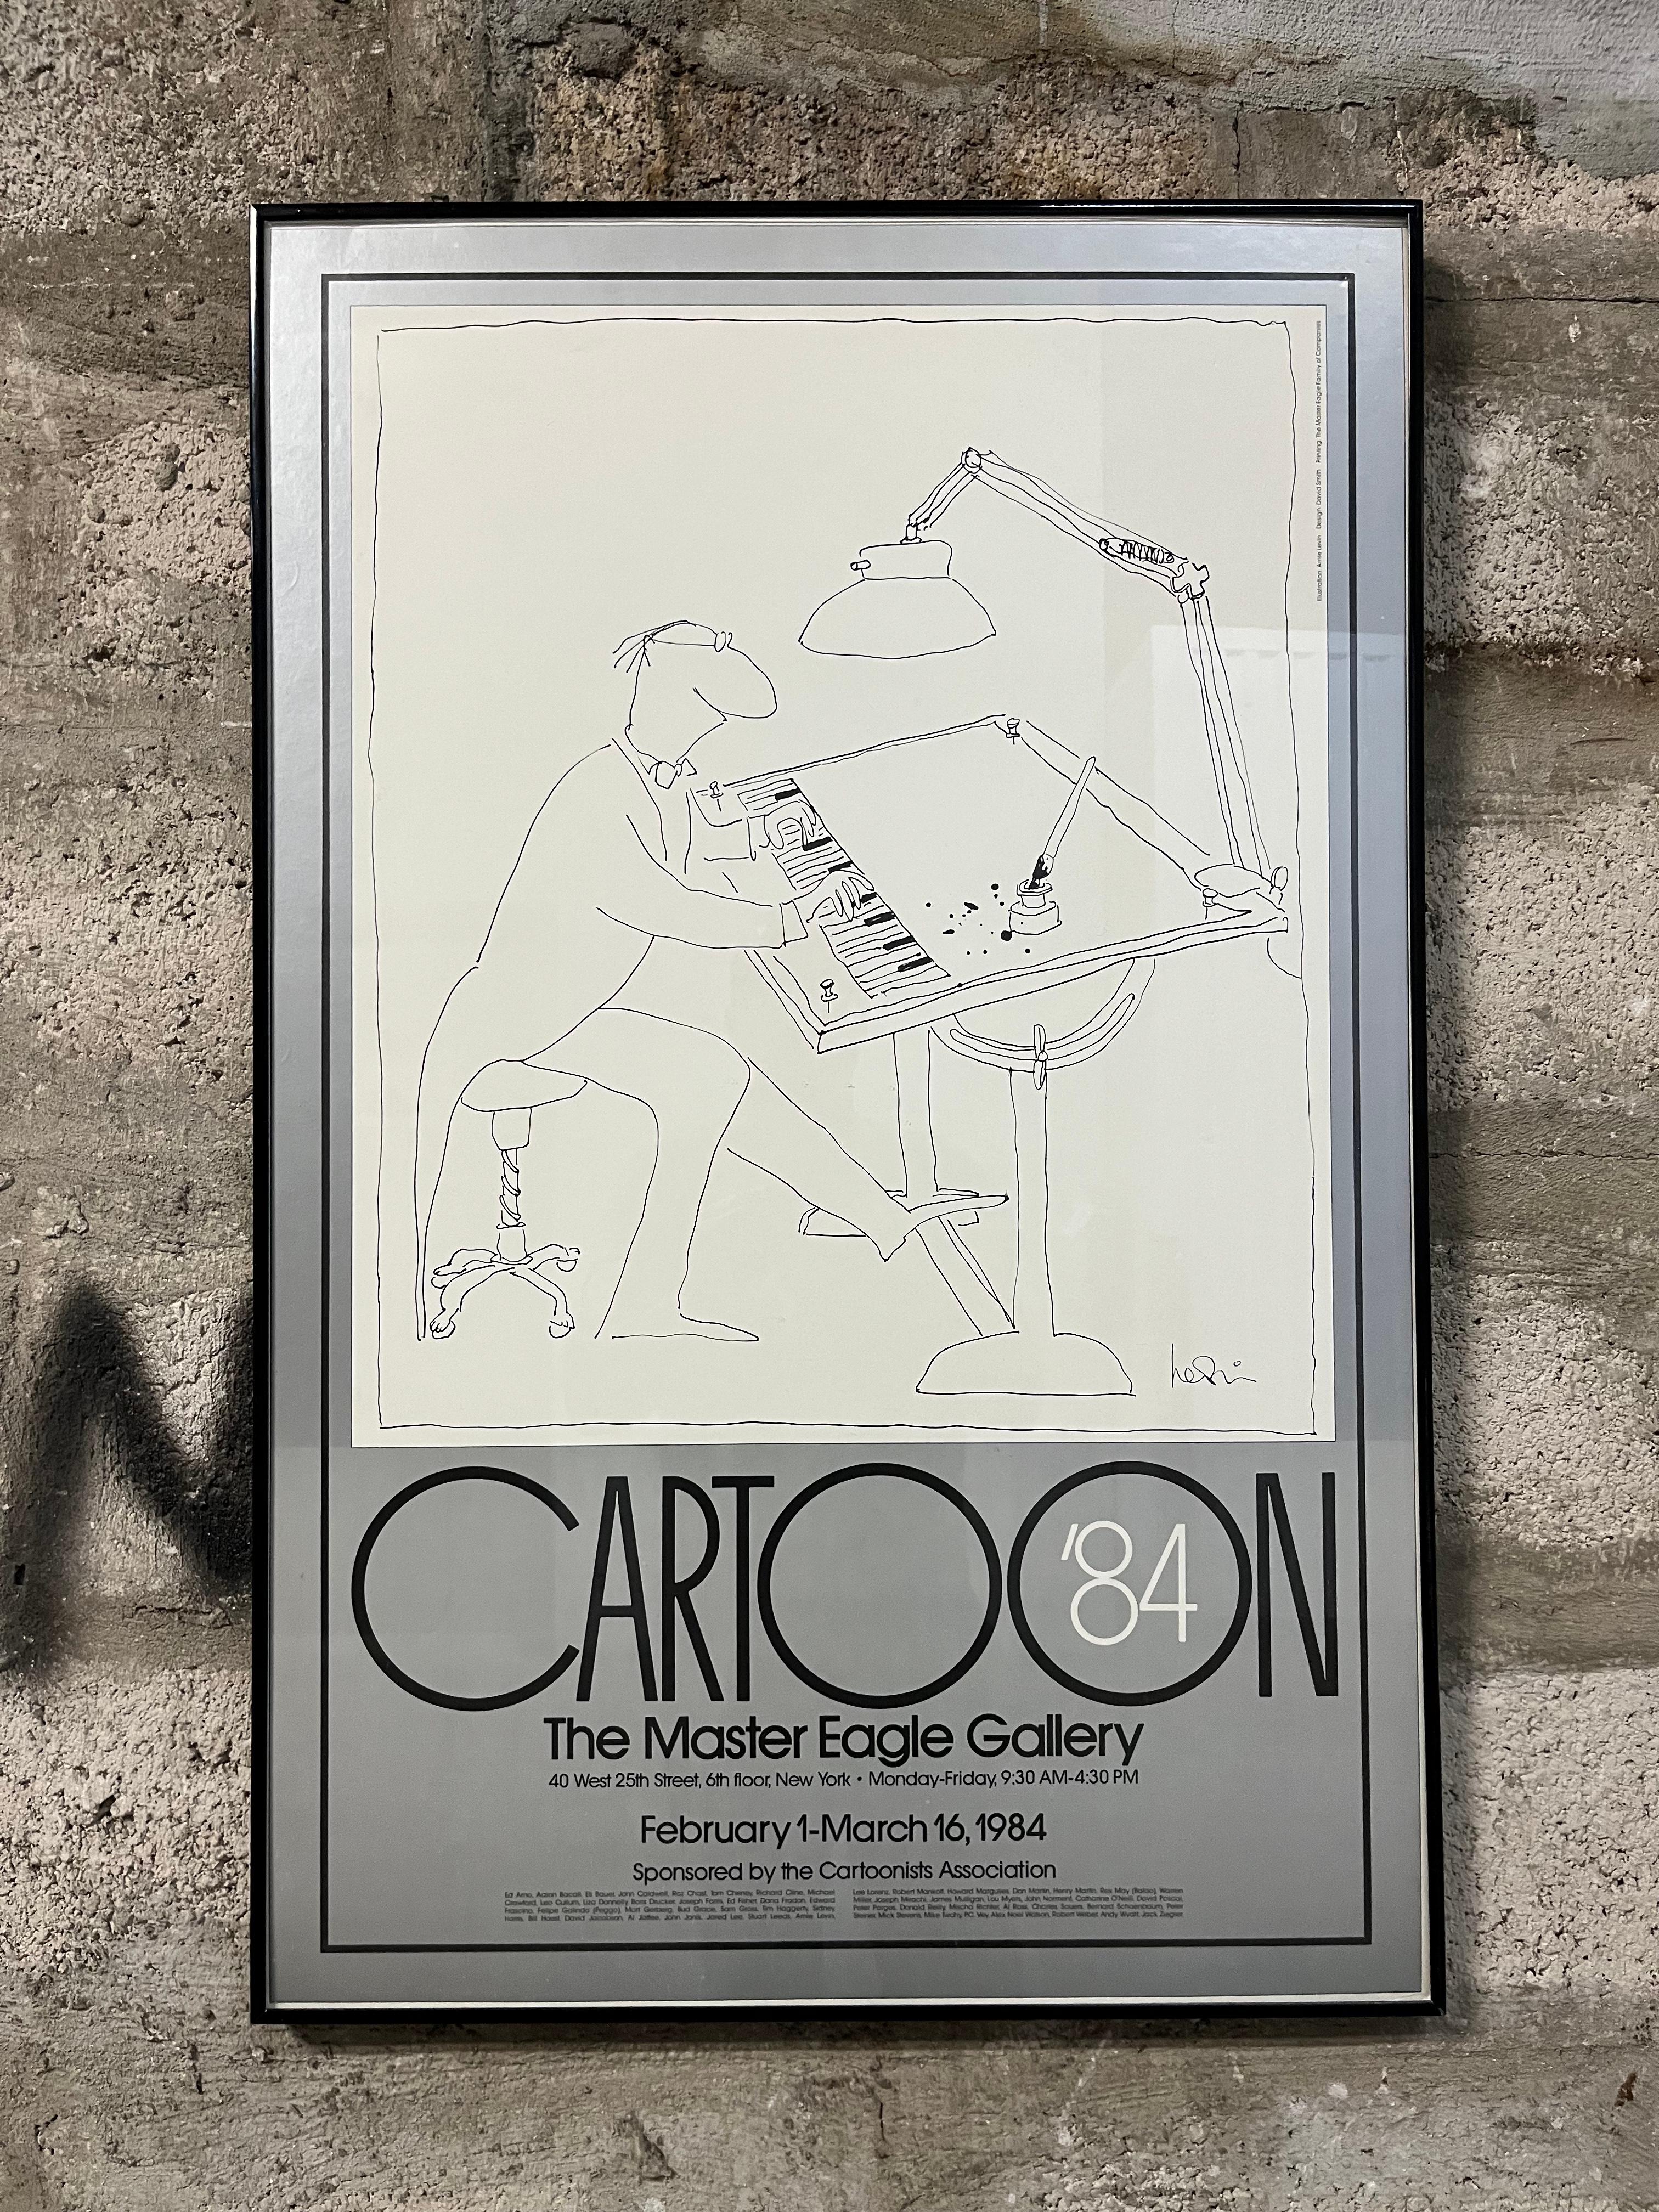 Vintage Original Cartoon '84 The Master Eagle Gallery Framed Exhibition Poster by American Cartoonist from The New Yorker, Arnie Levin.
Features a black and white cartoonist illustration on a silver background. 
Framed with a brushed aluminum black